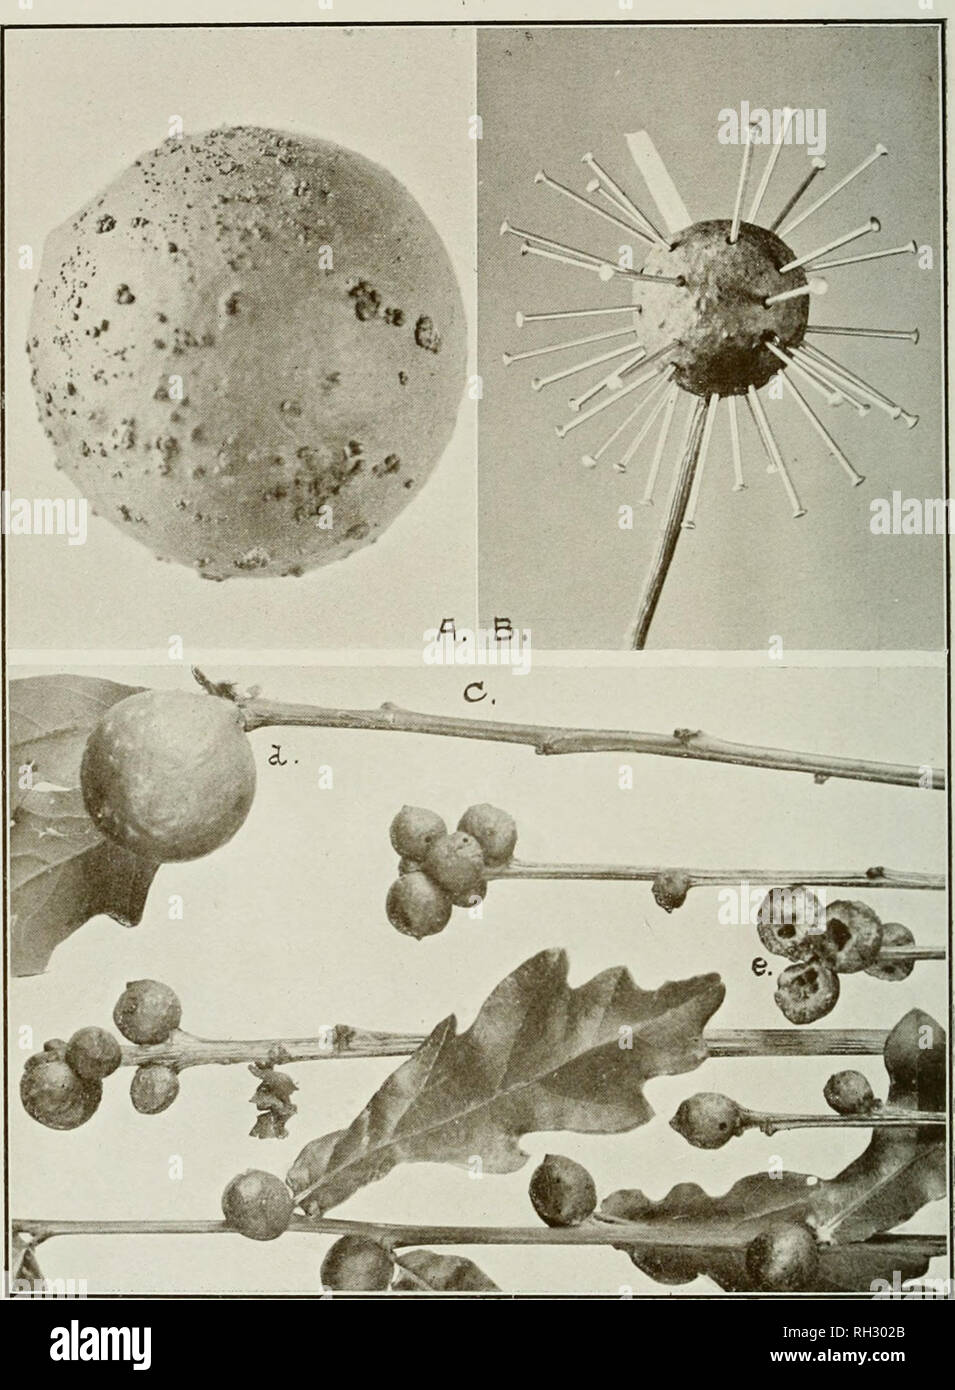 . British oak galls. Galls (Botany). PLATE XXXTX.. Galls caused by Ctnips Kollari. a. Attacked by the fungus Phoma GALLORUM. B. A Specimen from which thirty-two inqiiilines have emerged and one Ctnips Kollari ; their lioles are indicated by pins and a match stick respectively, c. Specimens tenanted by parasites and growth ai-rested thereby. d. A normal specimen for comparison, e. Sections showing larva cells. Specimen a x 2^. b and c nearly nat. size. Adlard ^- Son, Impr,. Please note that these images are extracted from scanned page images that may have been digitally enhanced for readability Stock Photo